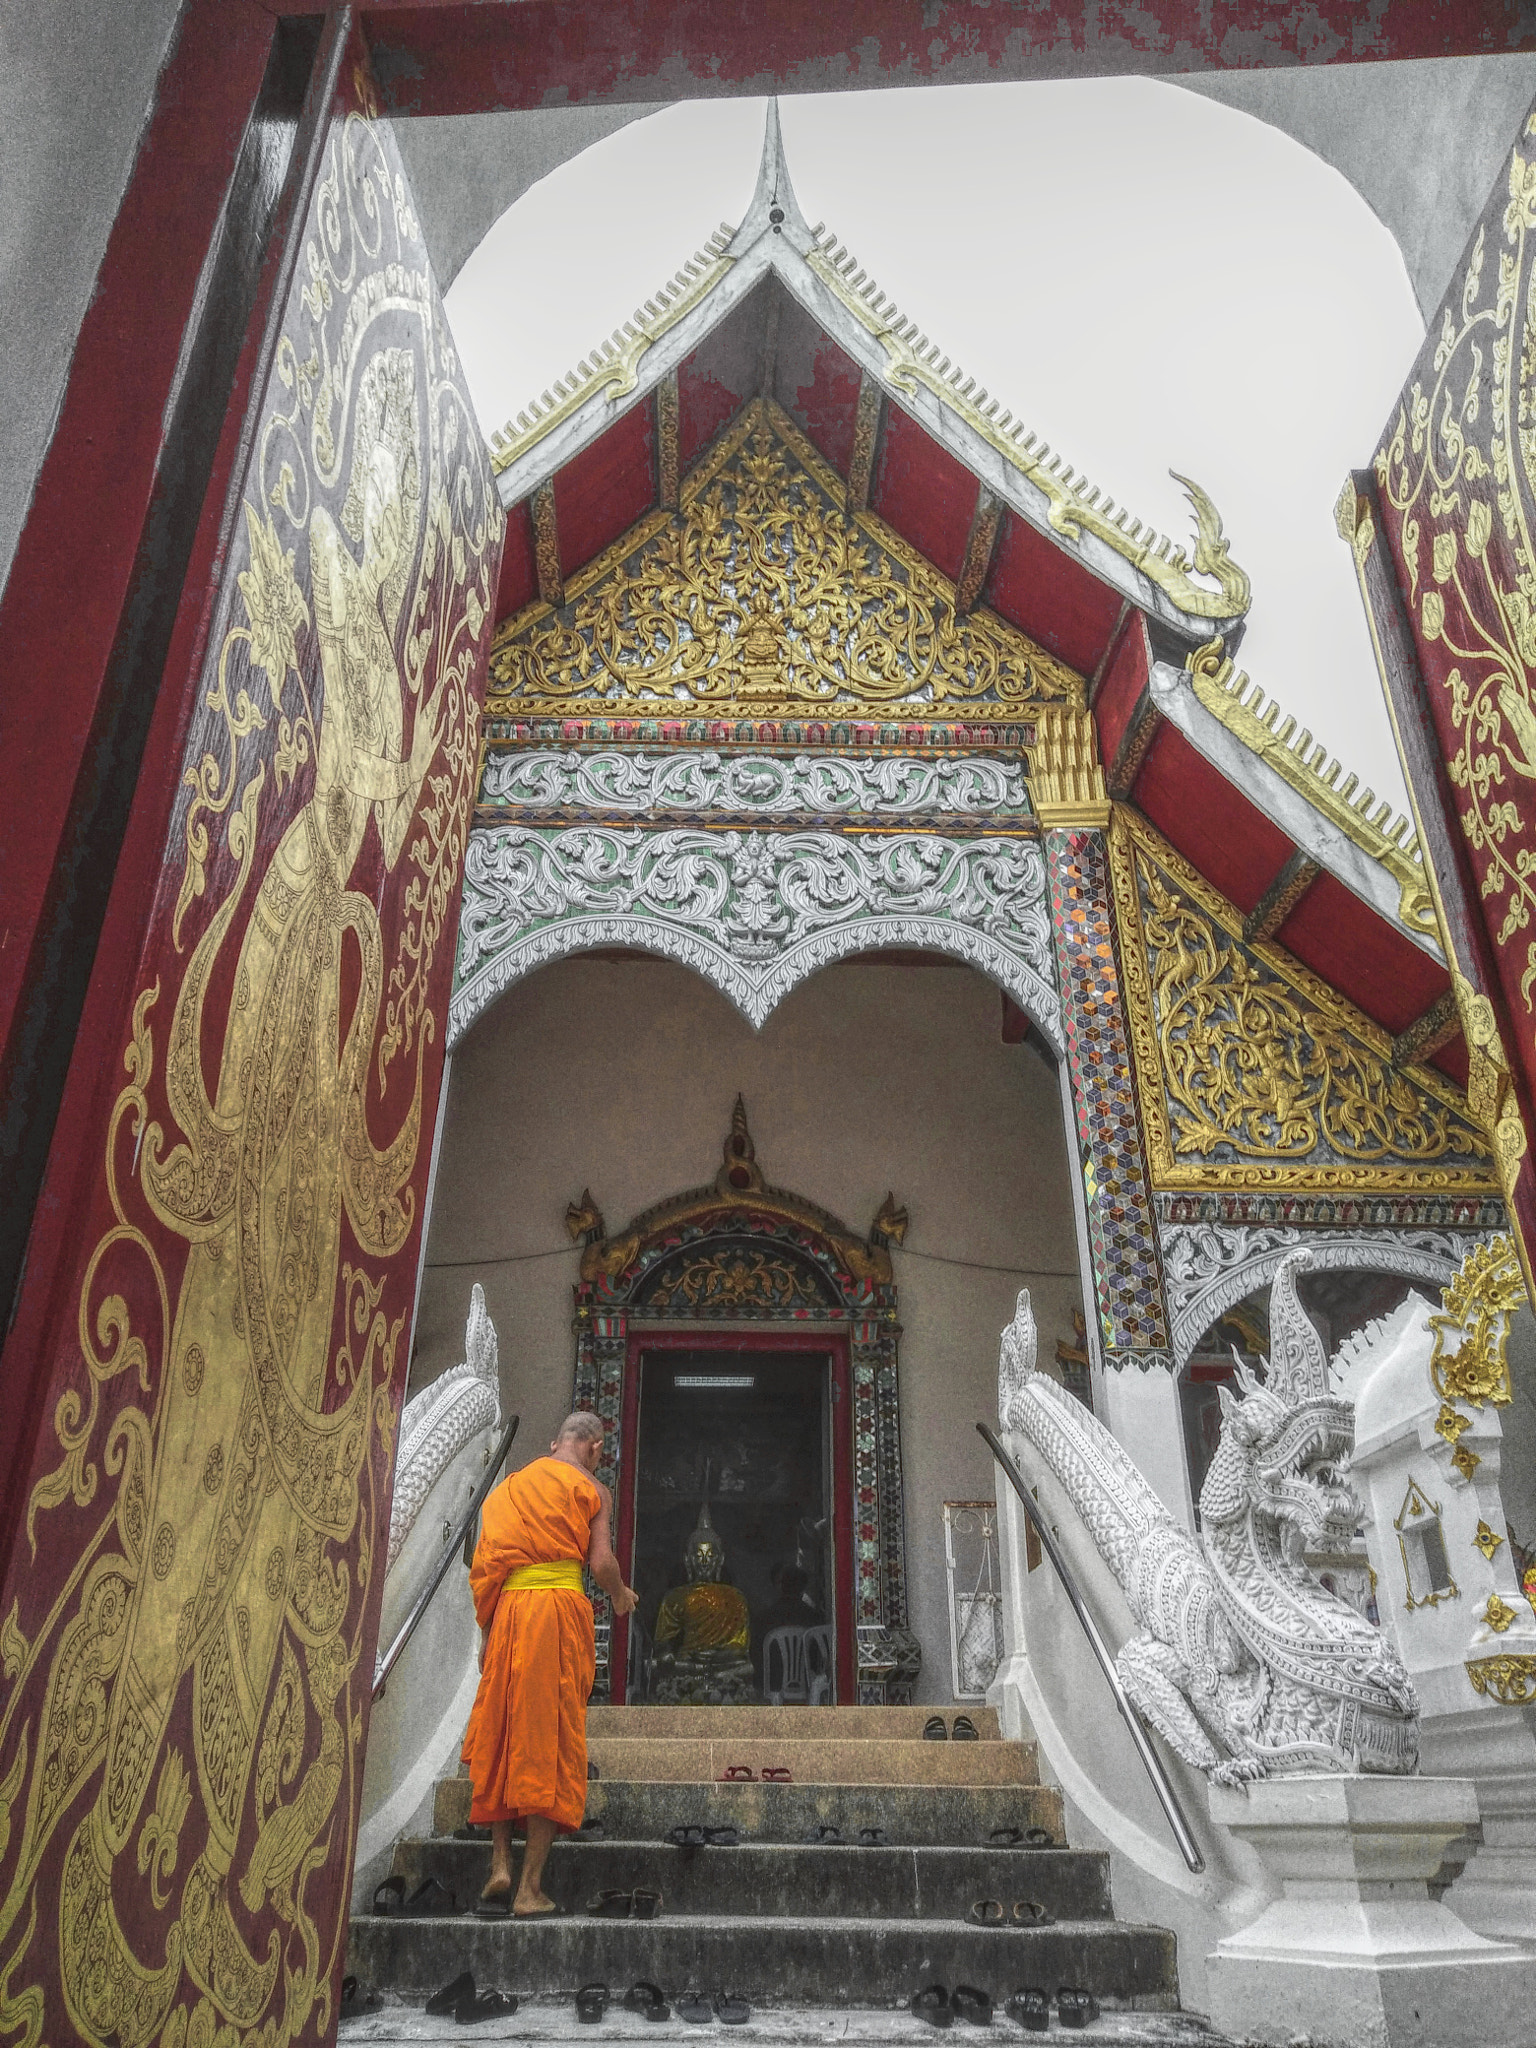 OPPO R7sfg sample photo. Thailand temple photography